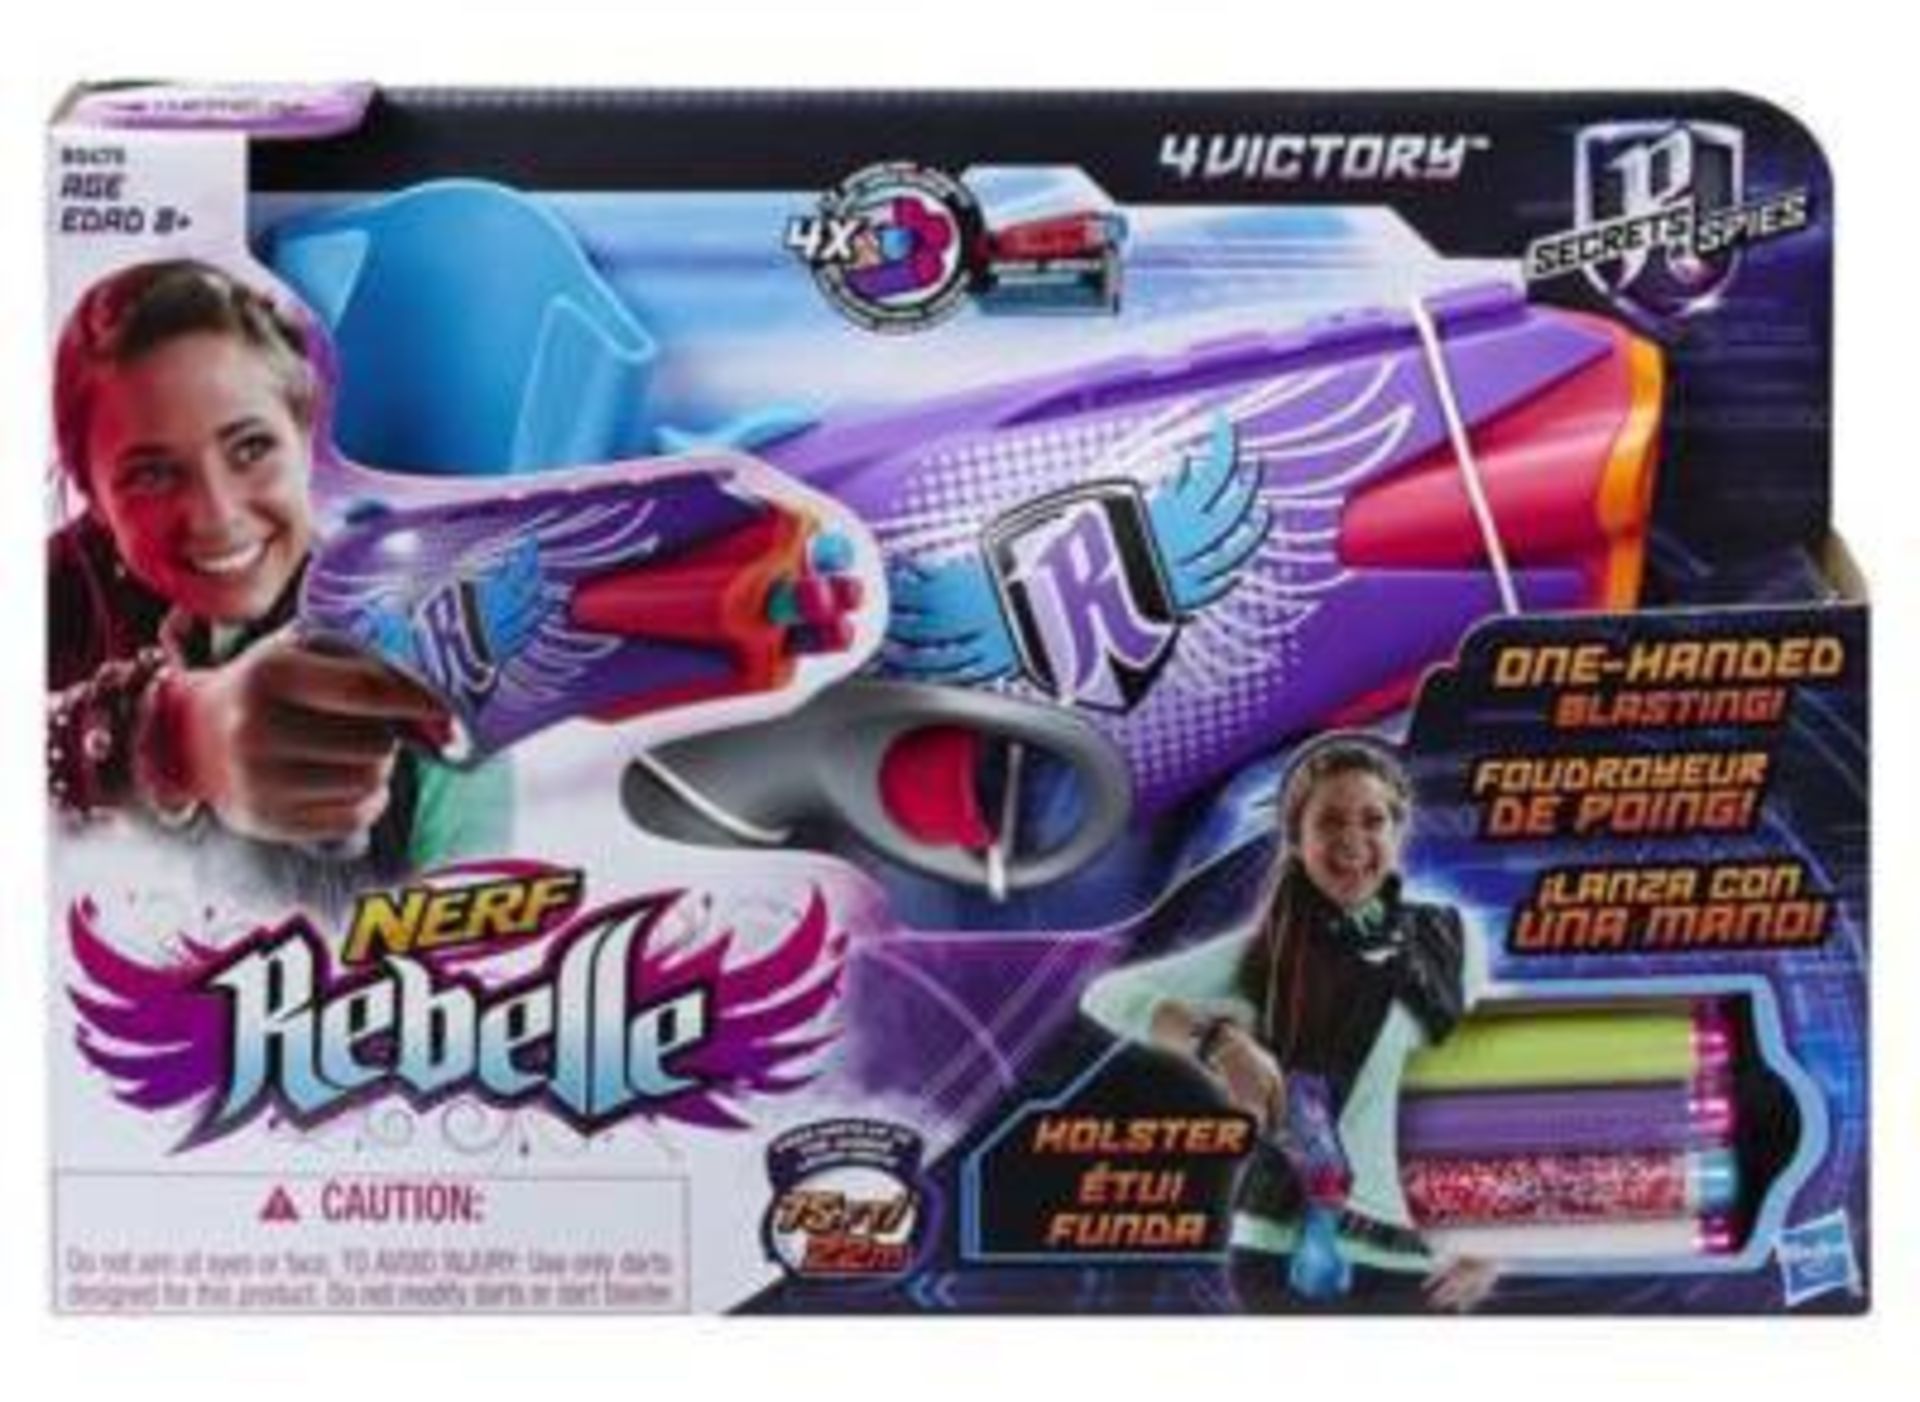 V Brand New Hasbro Nerf Rebelle Lumanate Blaster With 3 Darts With Glowing Tips - Fires Up To 26 - Image 2 of 2